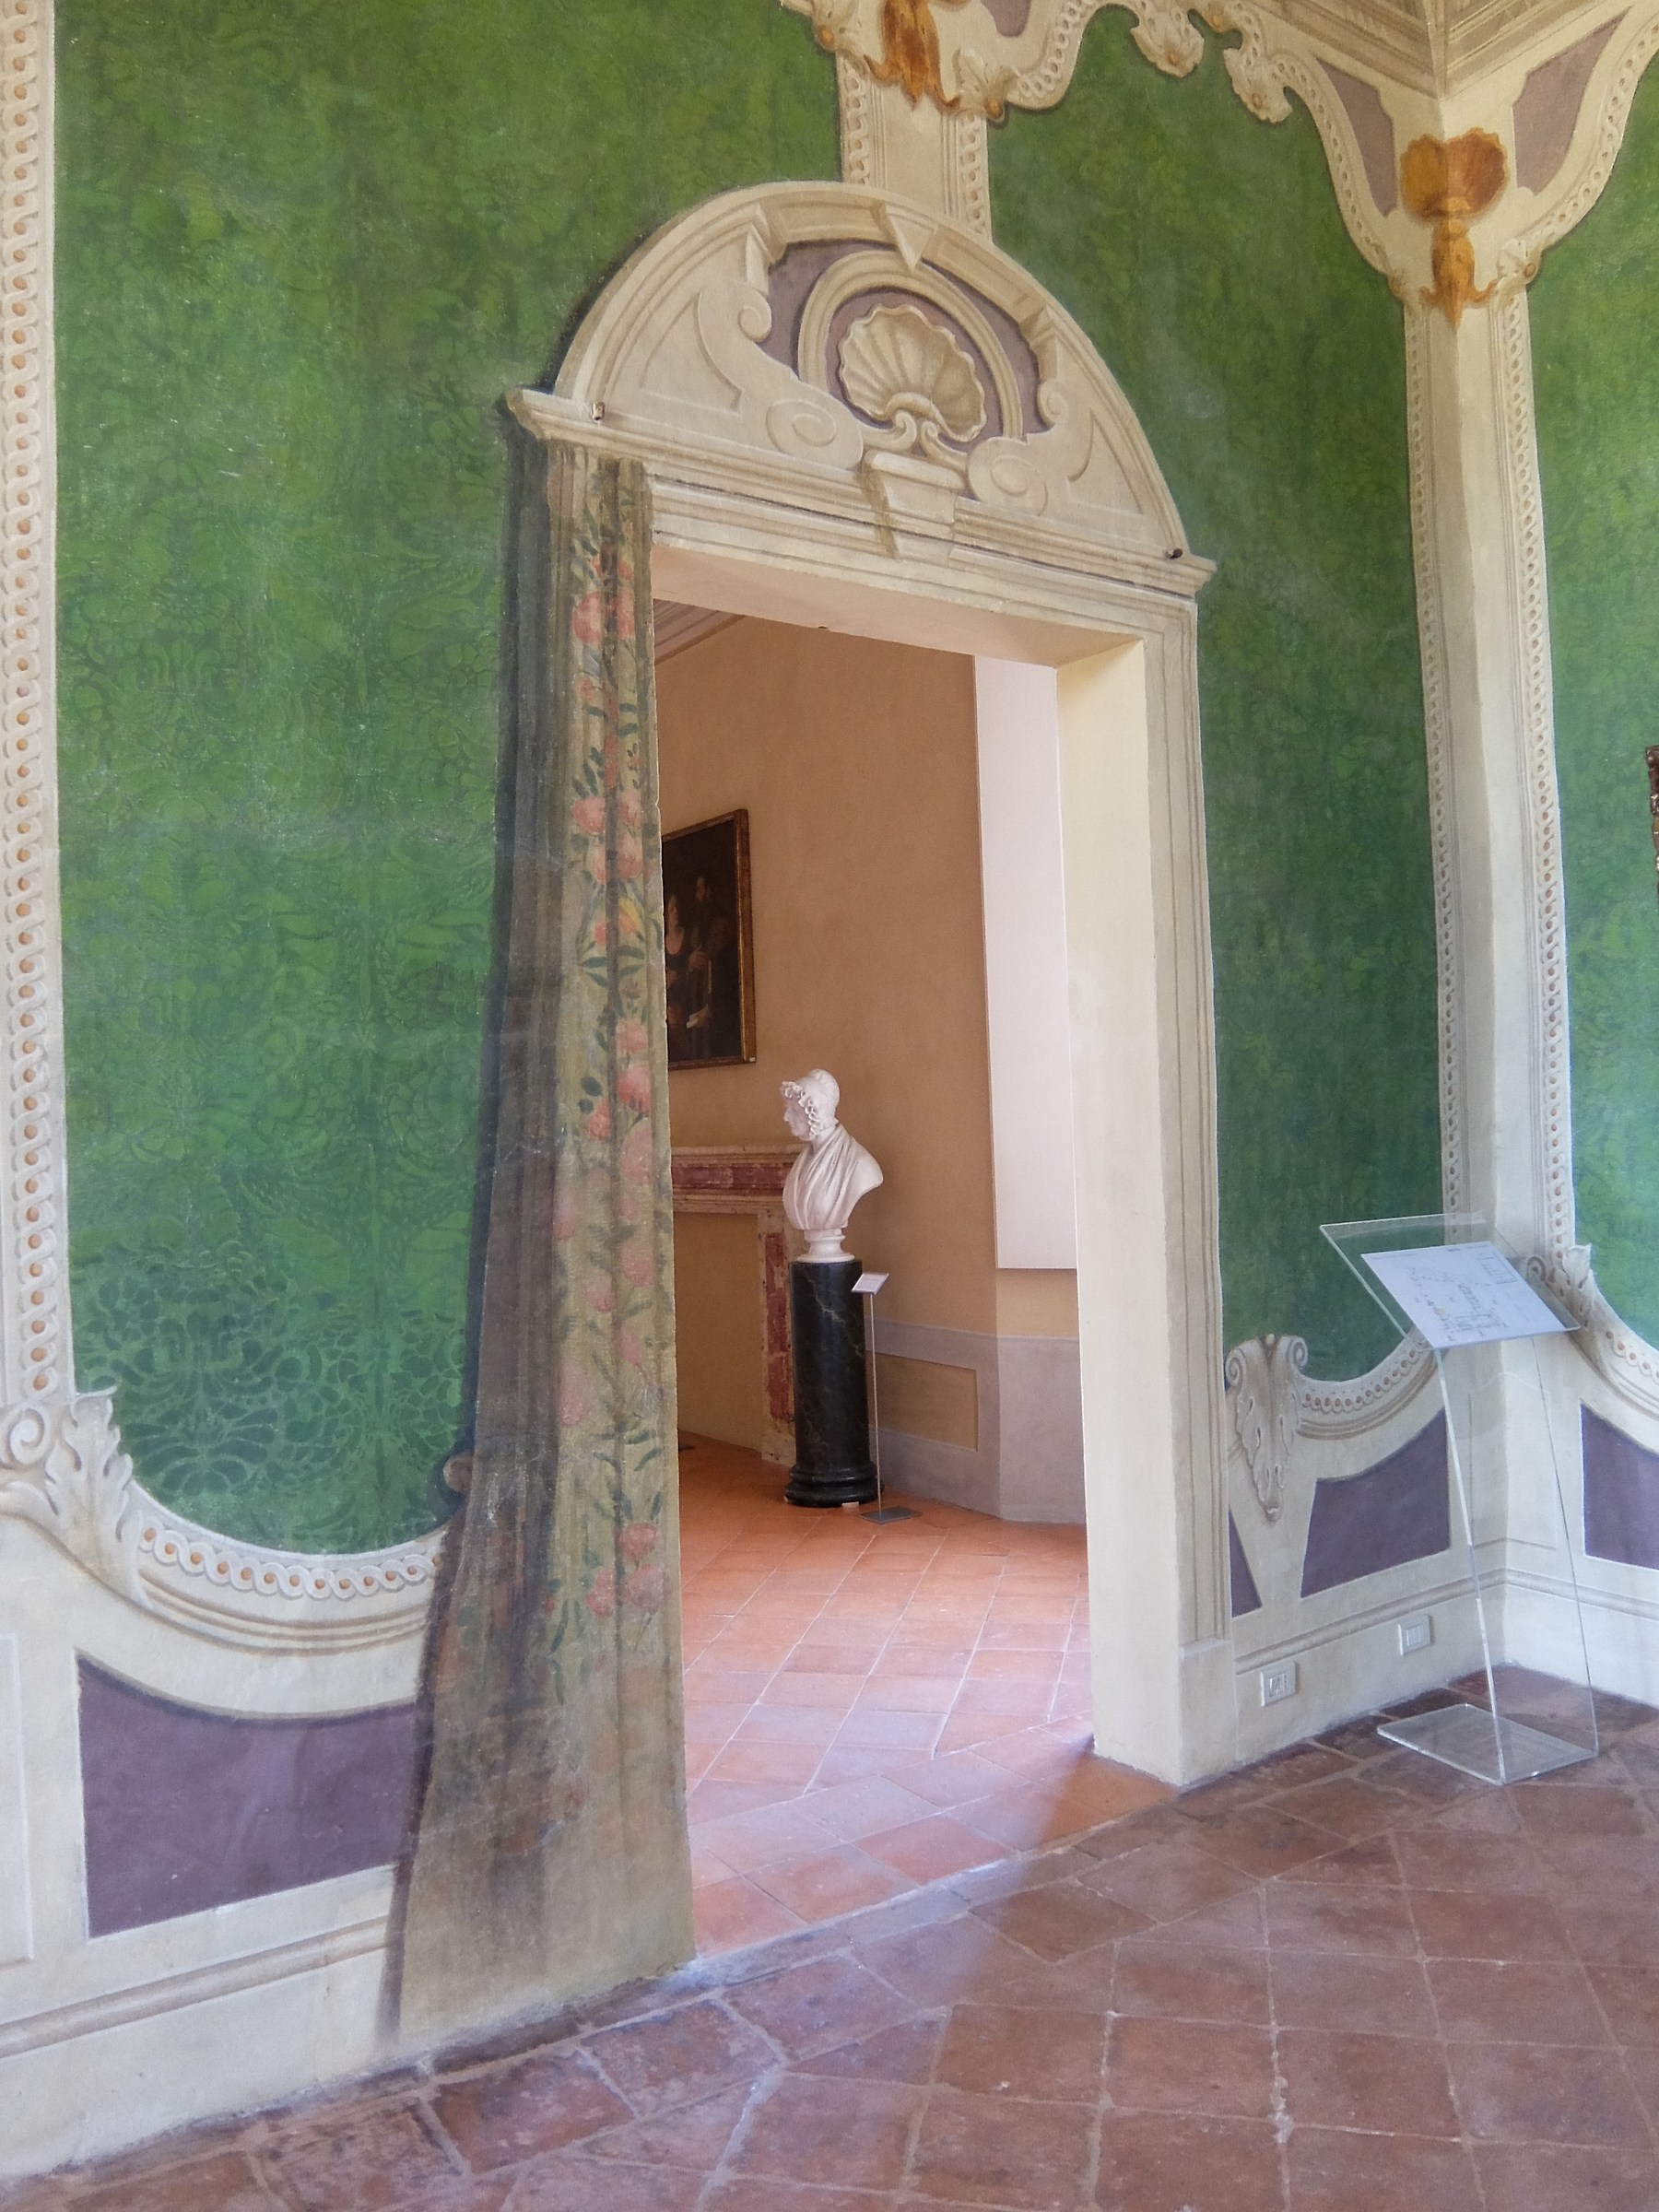 Interior of the Ducal Palace of Sassuolo, the "Delizia"...